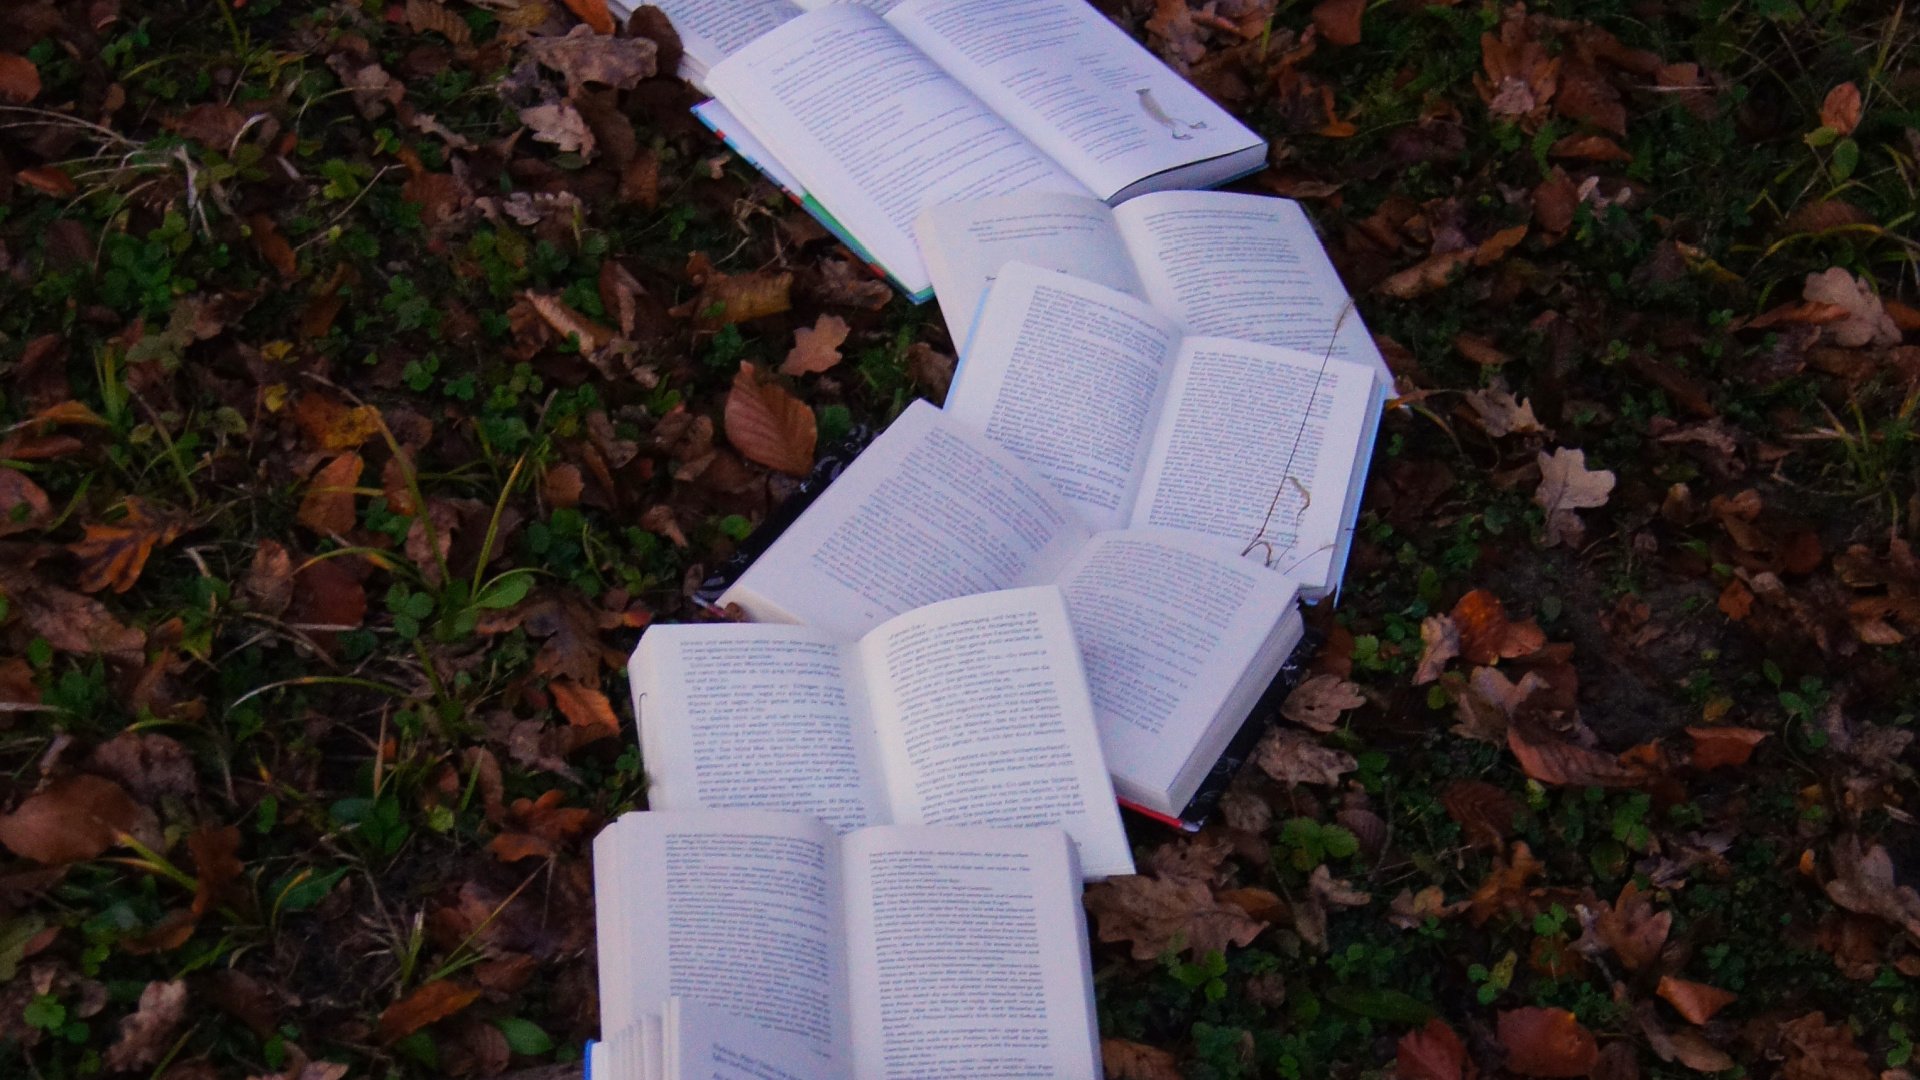 Six books, open and arranged in a line, resting on a bed of leaves on the ground